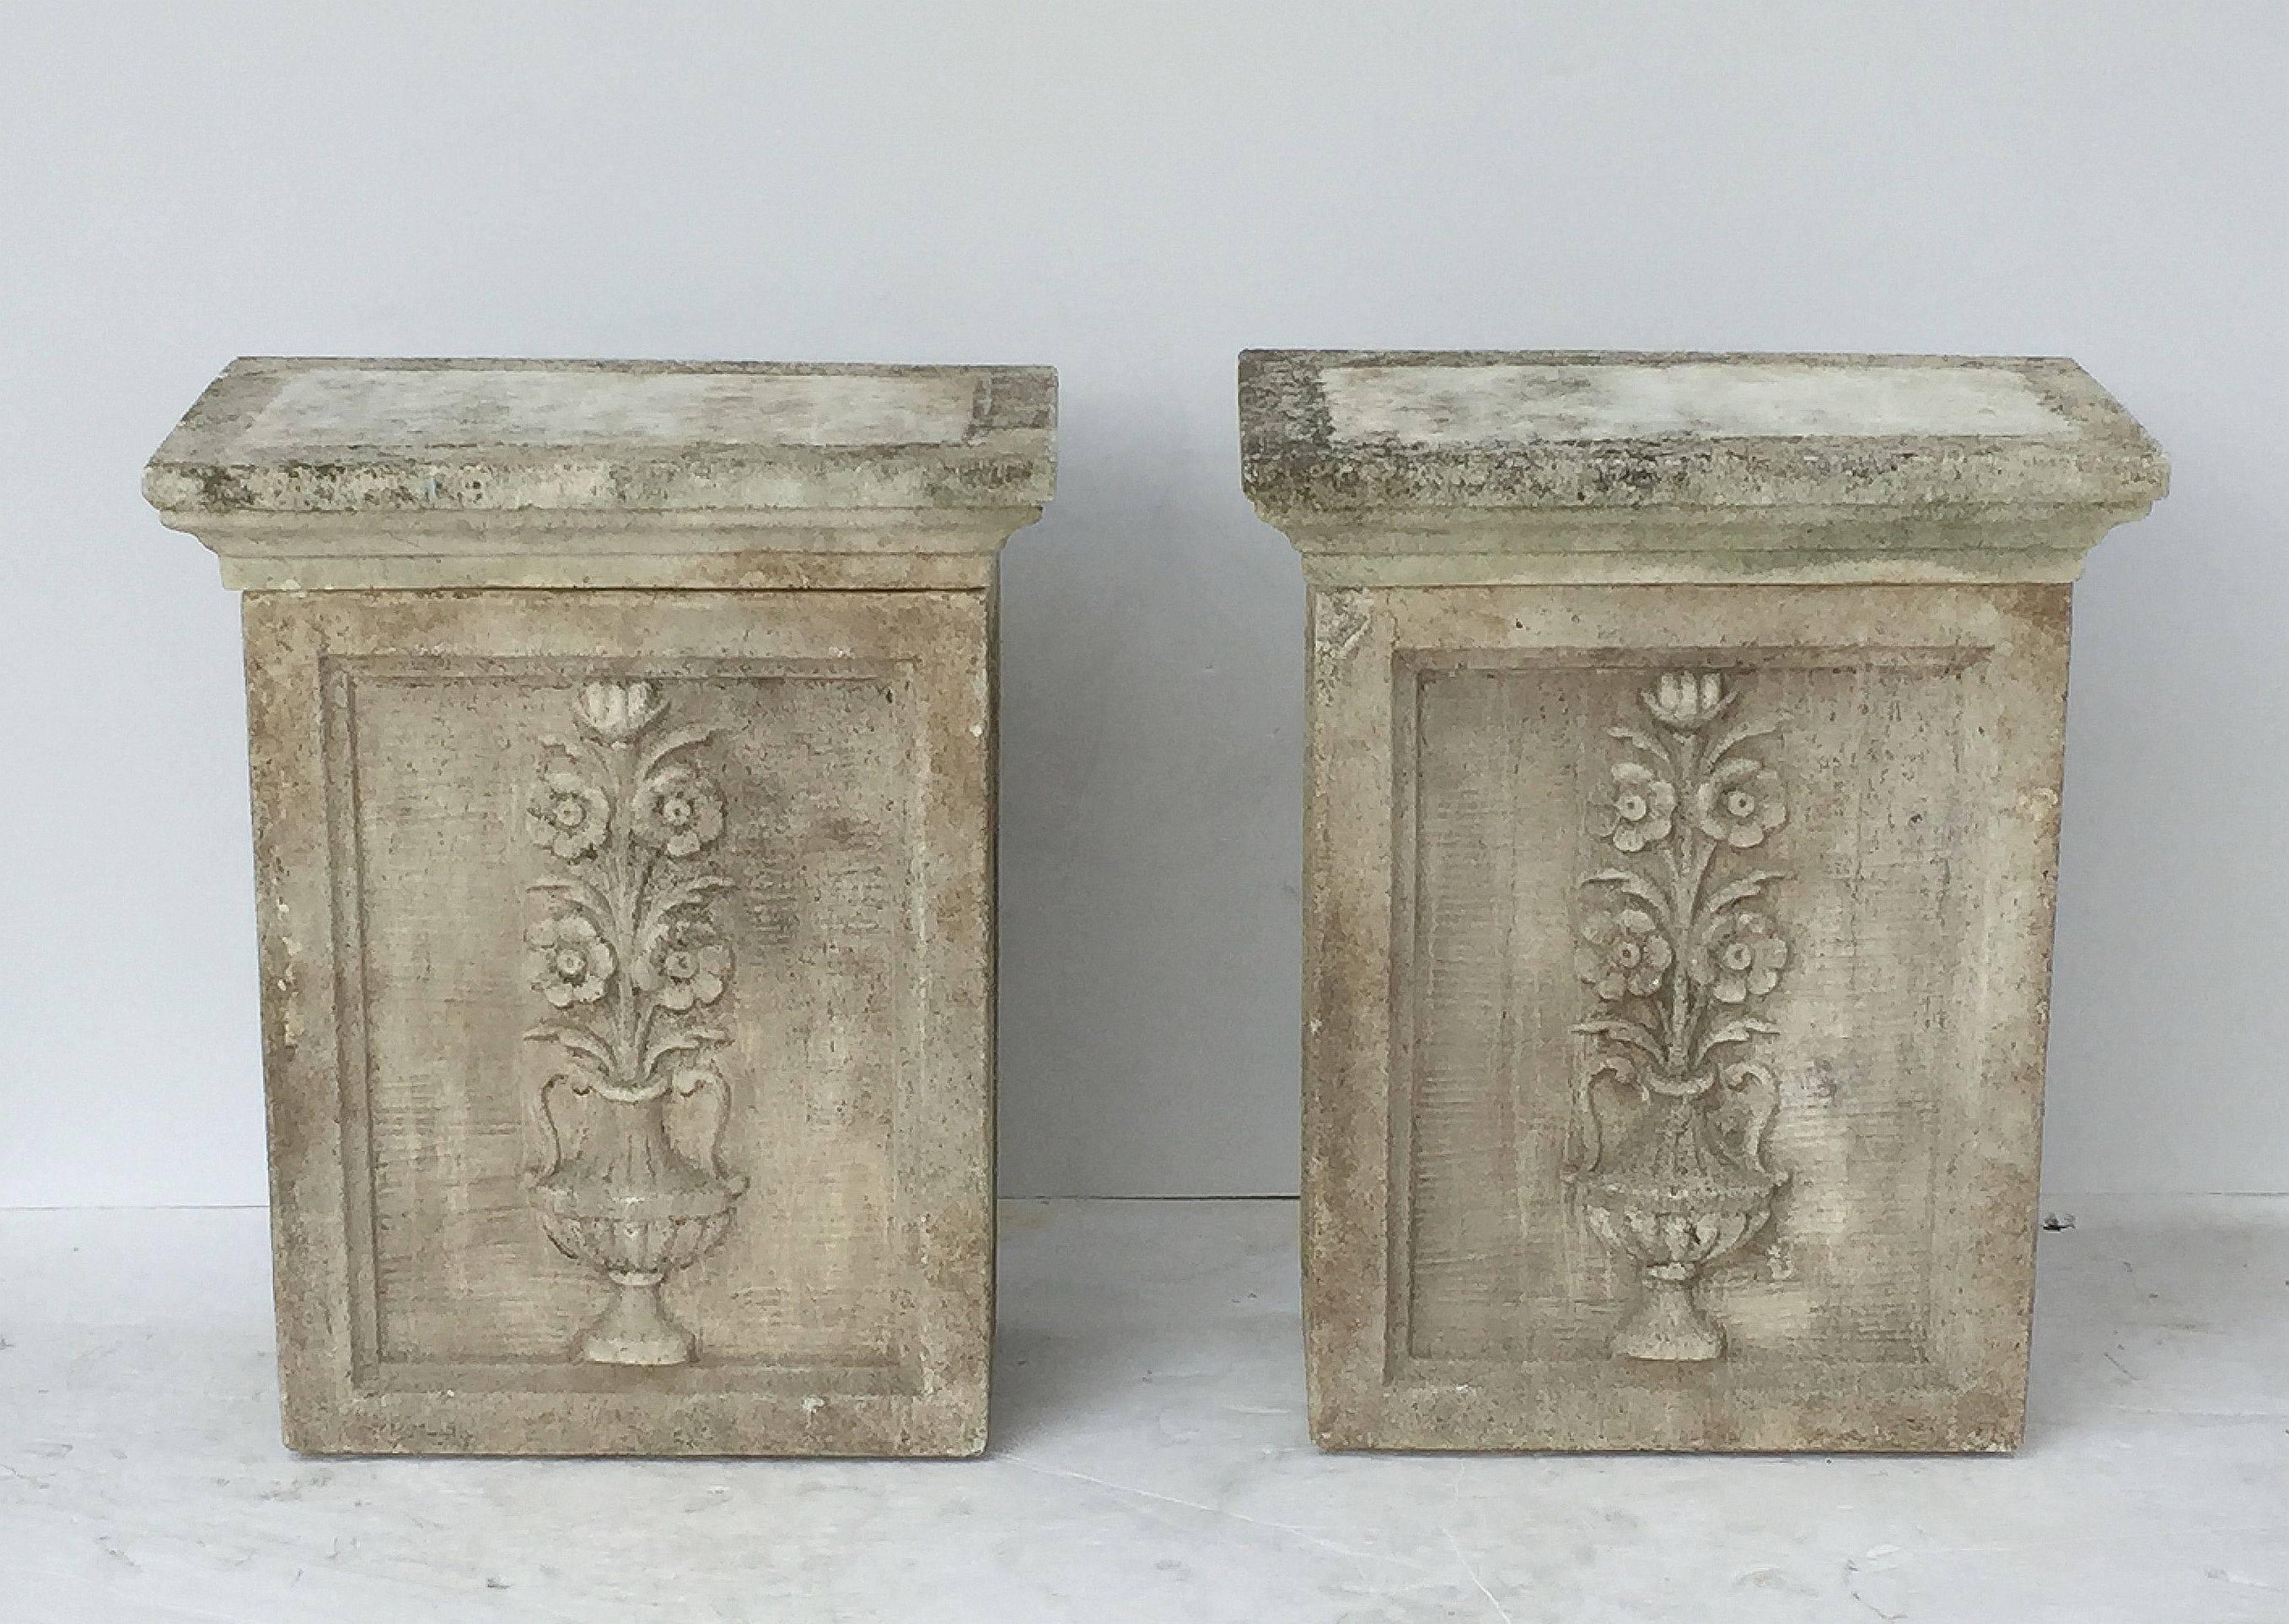 A fine pair of tall English rectangular garden pedestals or planter plinths of composition stone, each featuring a removable fitted plinth top set upon a pedestal base, with a relief of a Classical urn with flowers on opposing sides. 

Note: Each